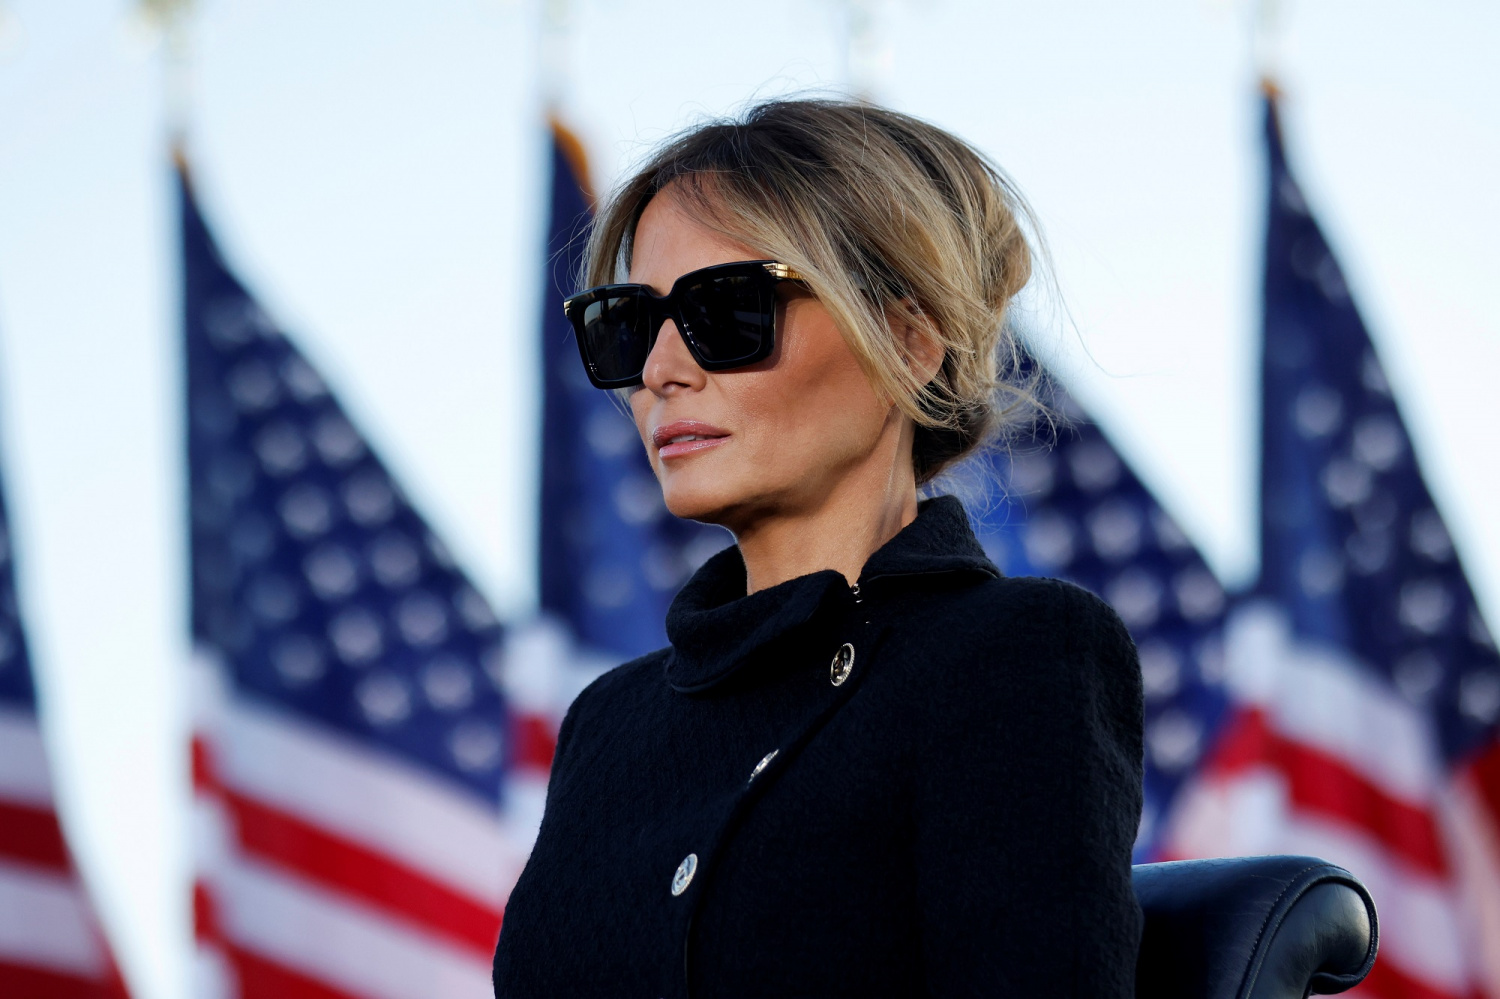 Melania Trump Praised As 'Classy' While Taylor Swift Called 'Trashy' In ...